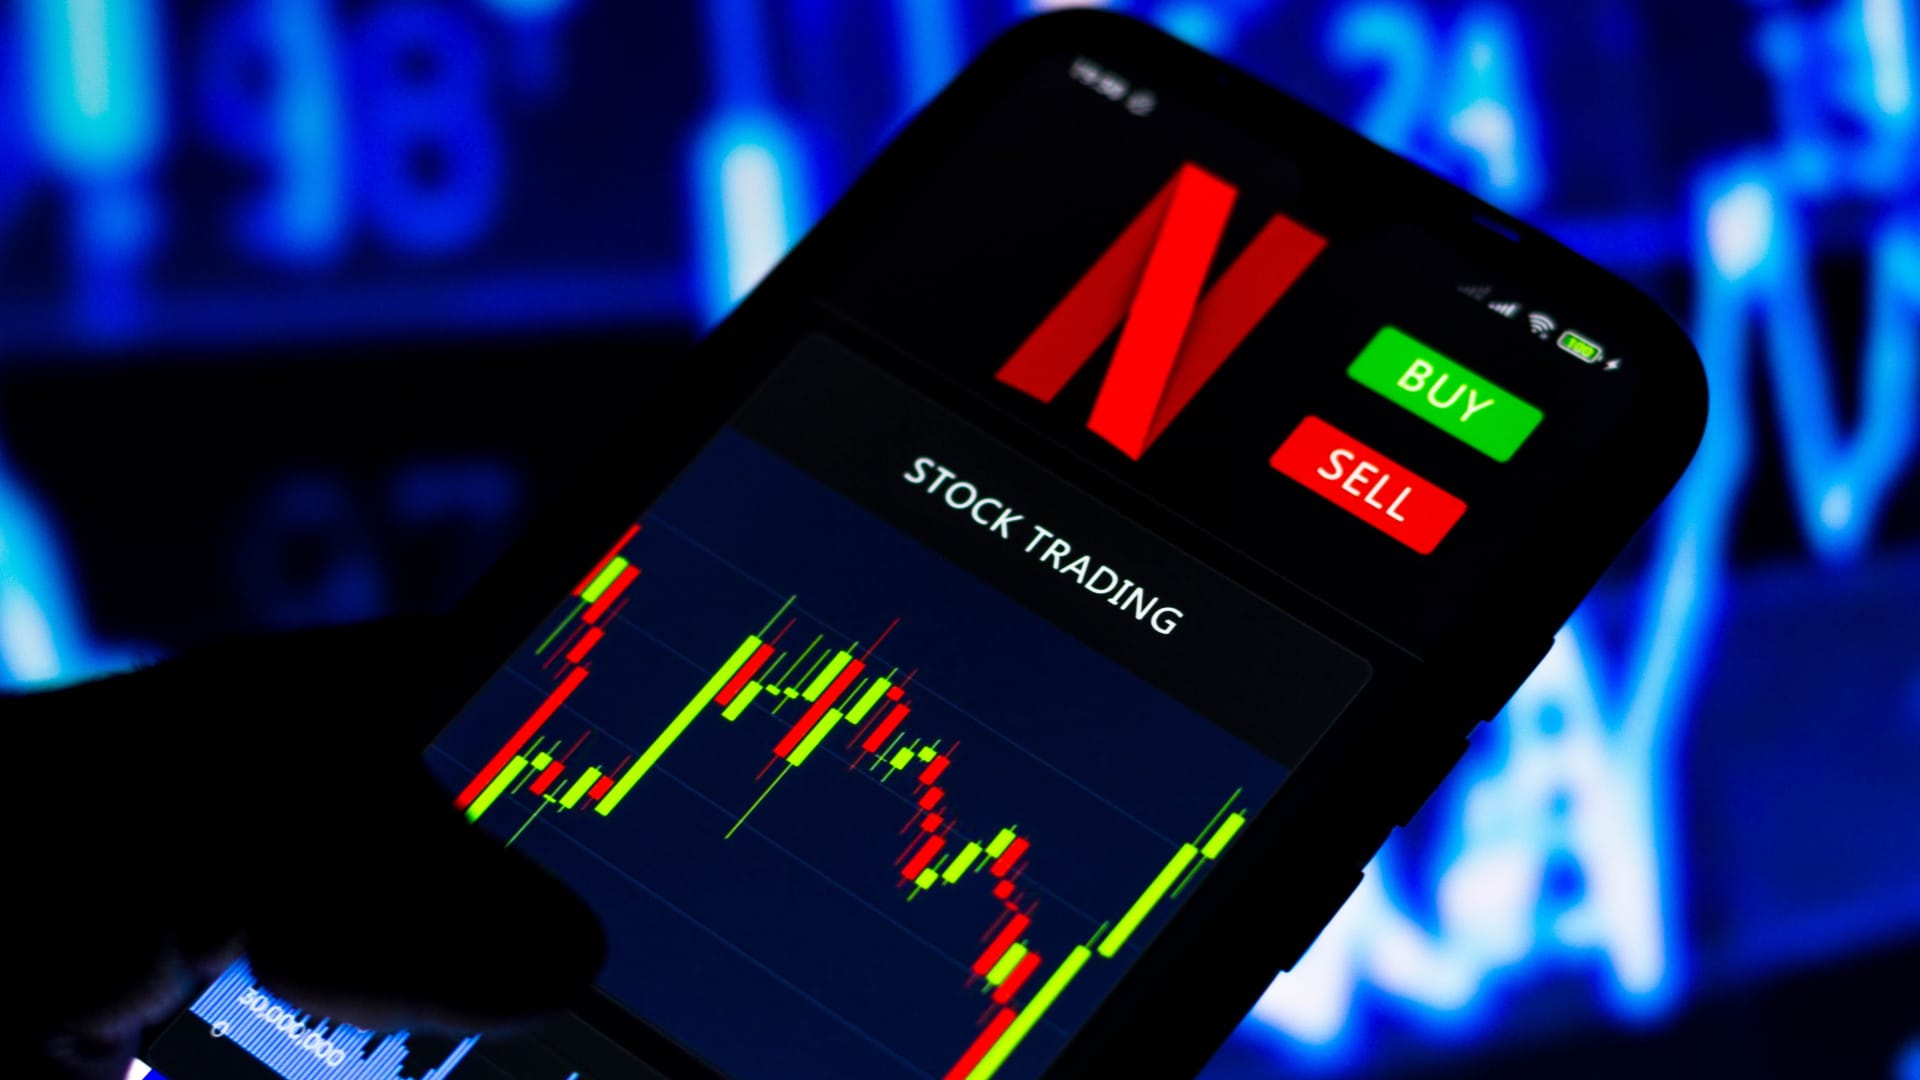 Netflix blows away expectations on subscriber numbers